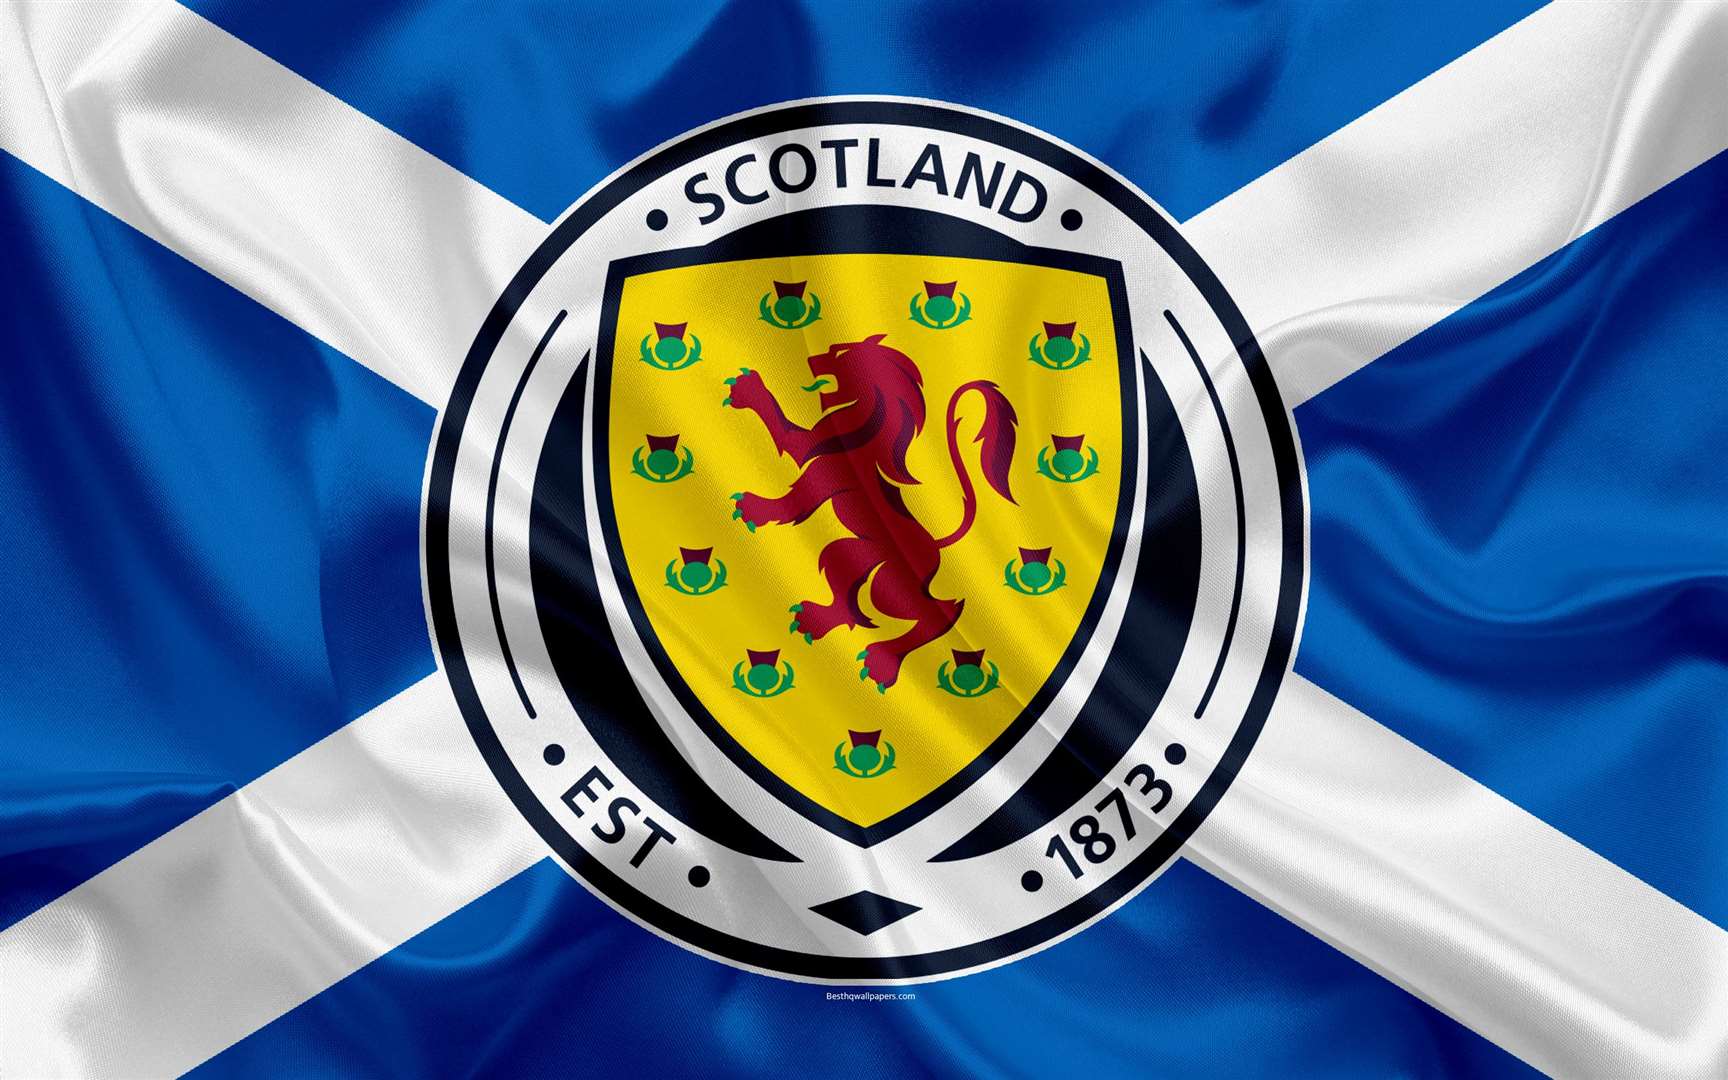 Scotland are promoted to Path A of Nations League.